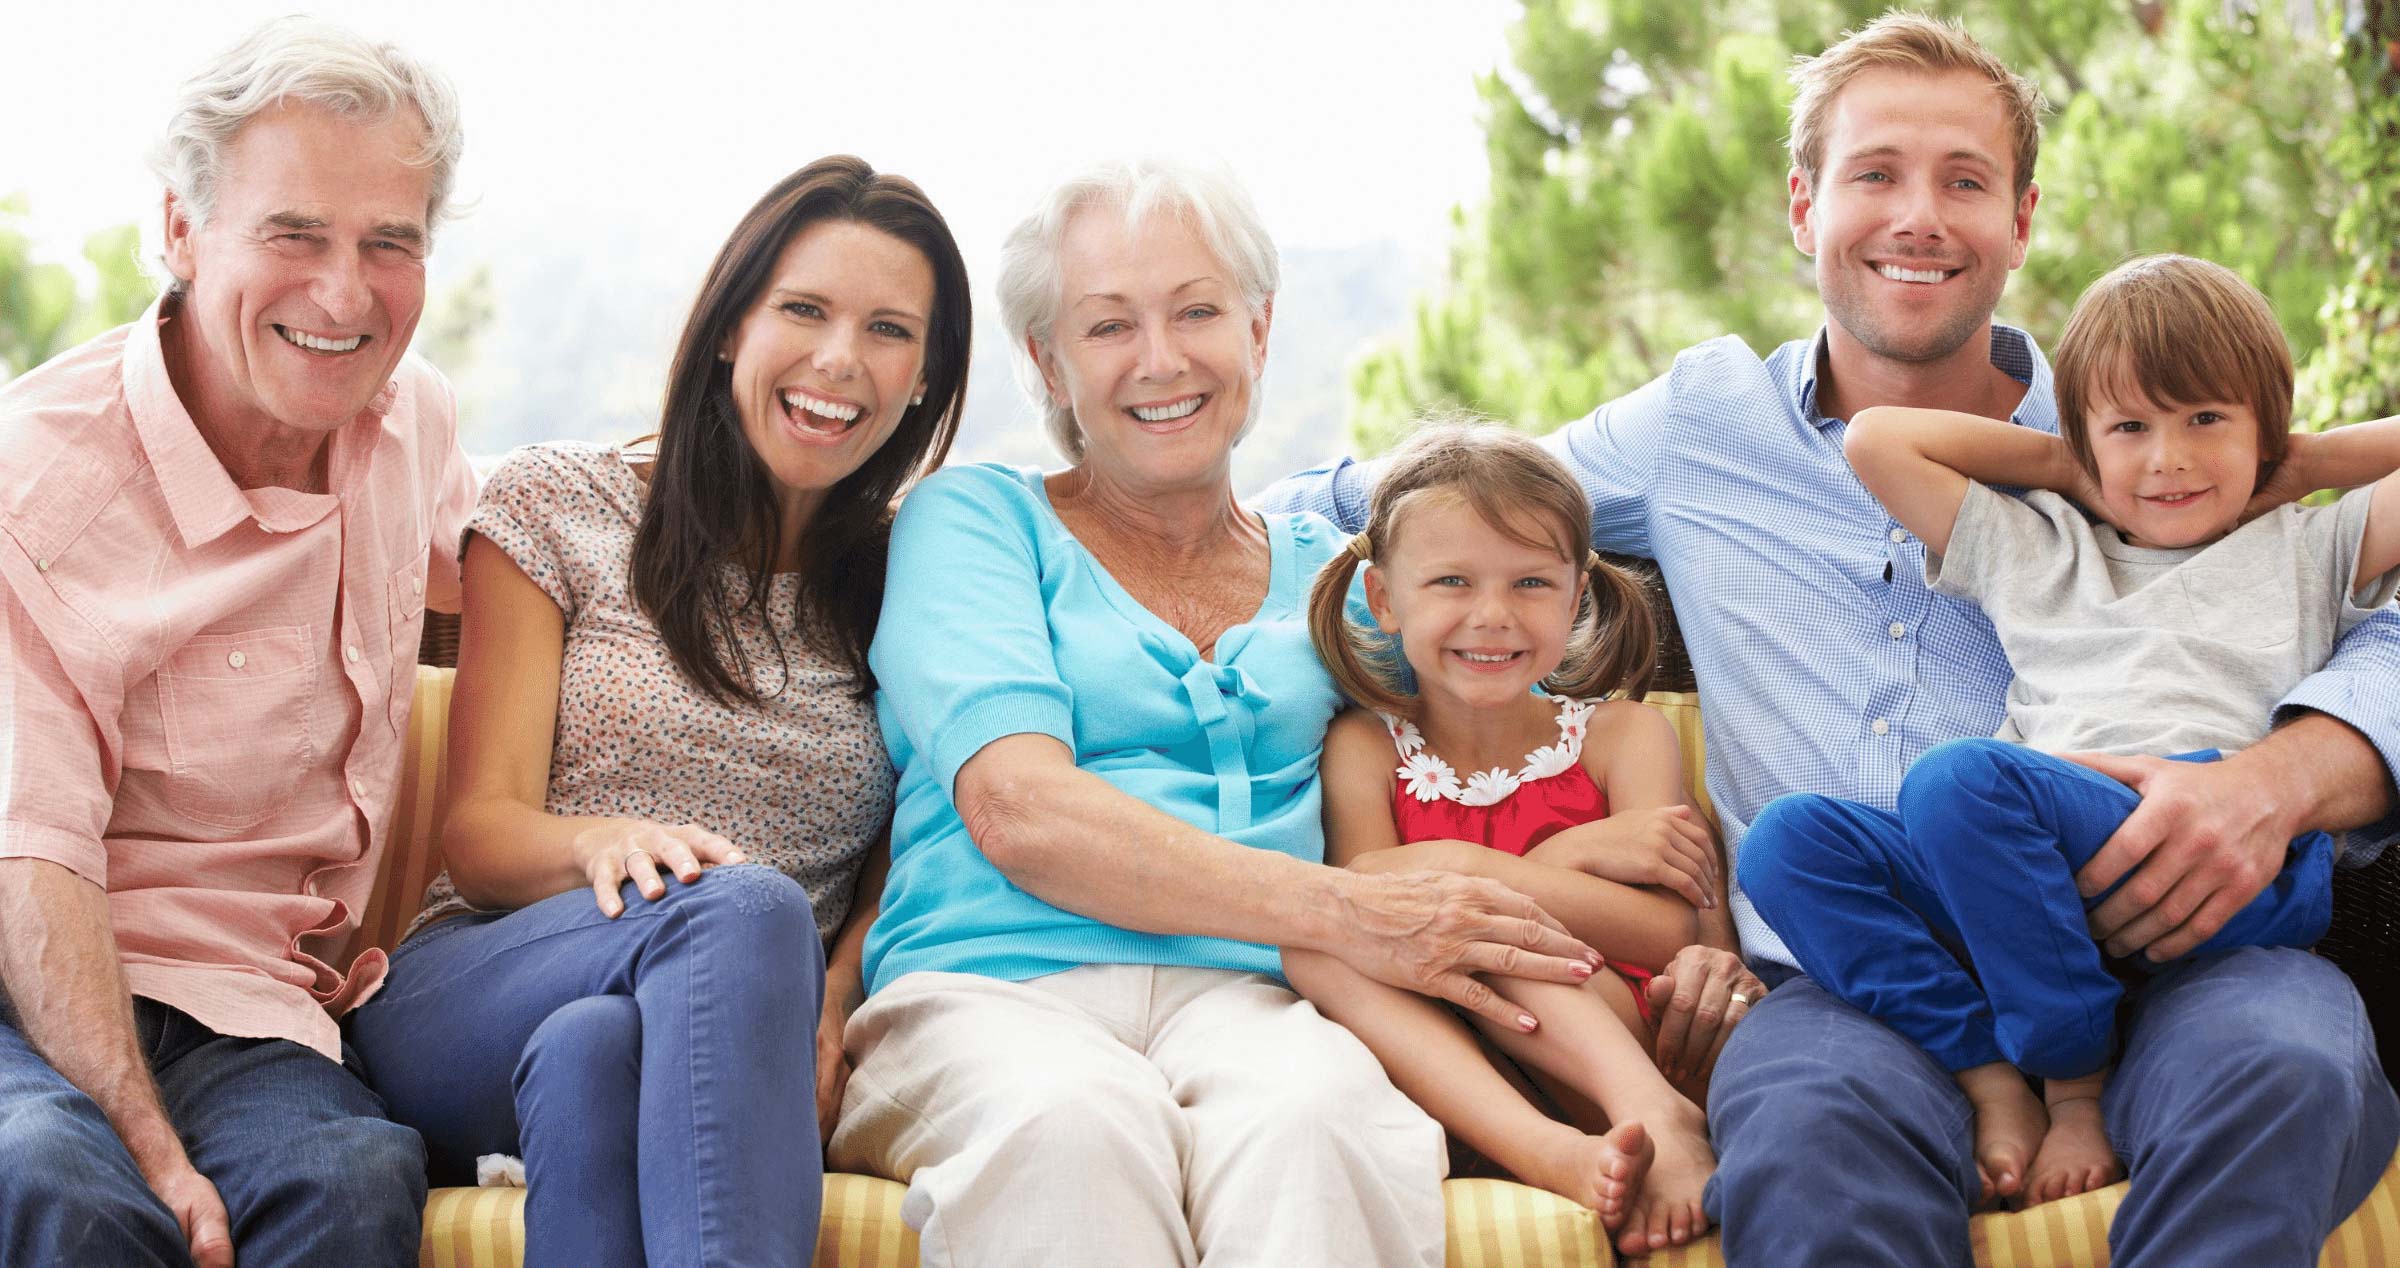 Image of family with three generations